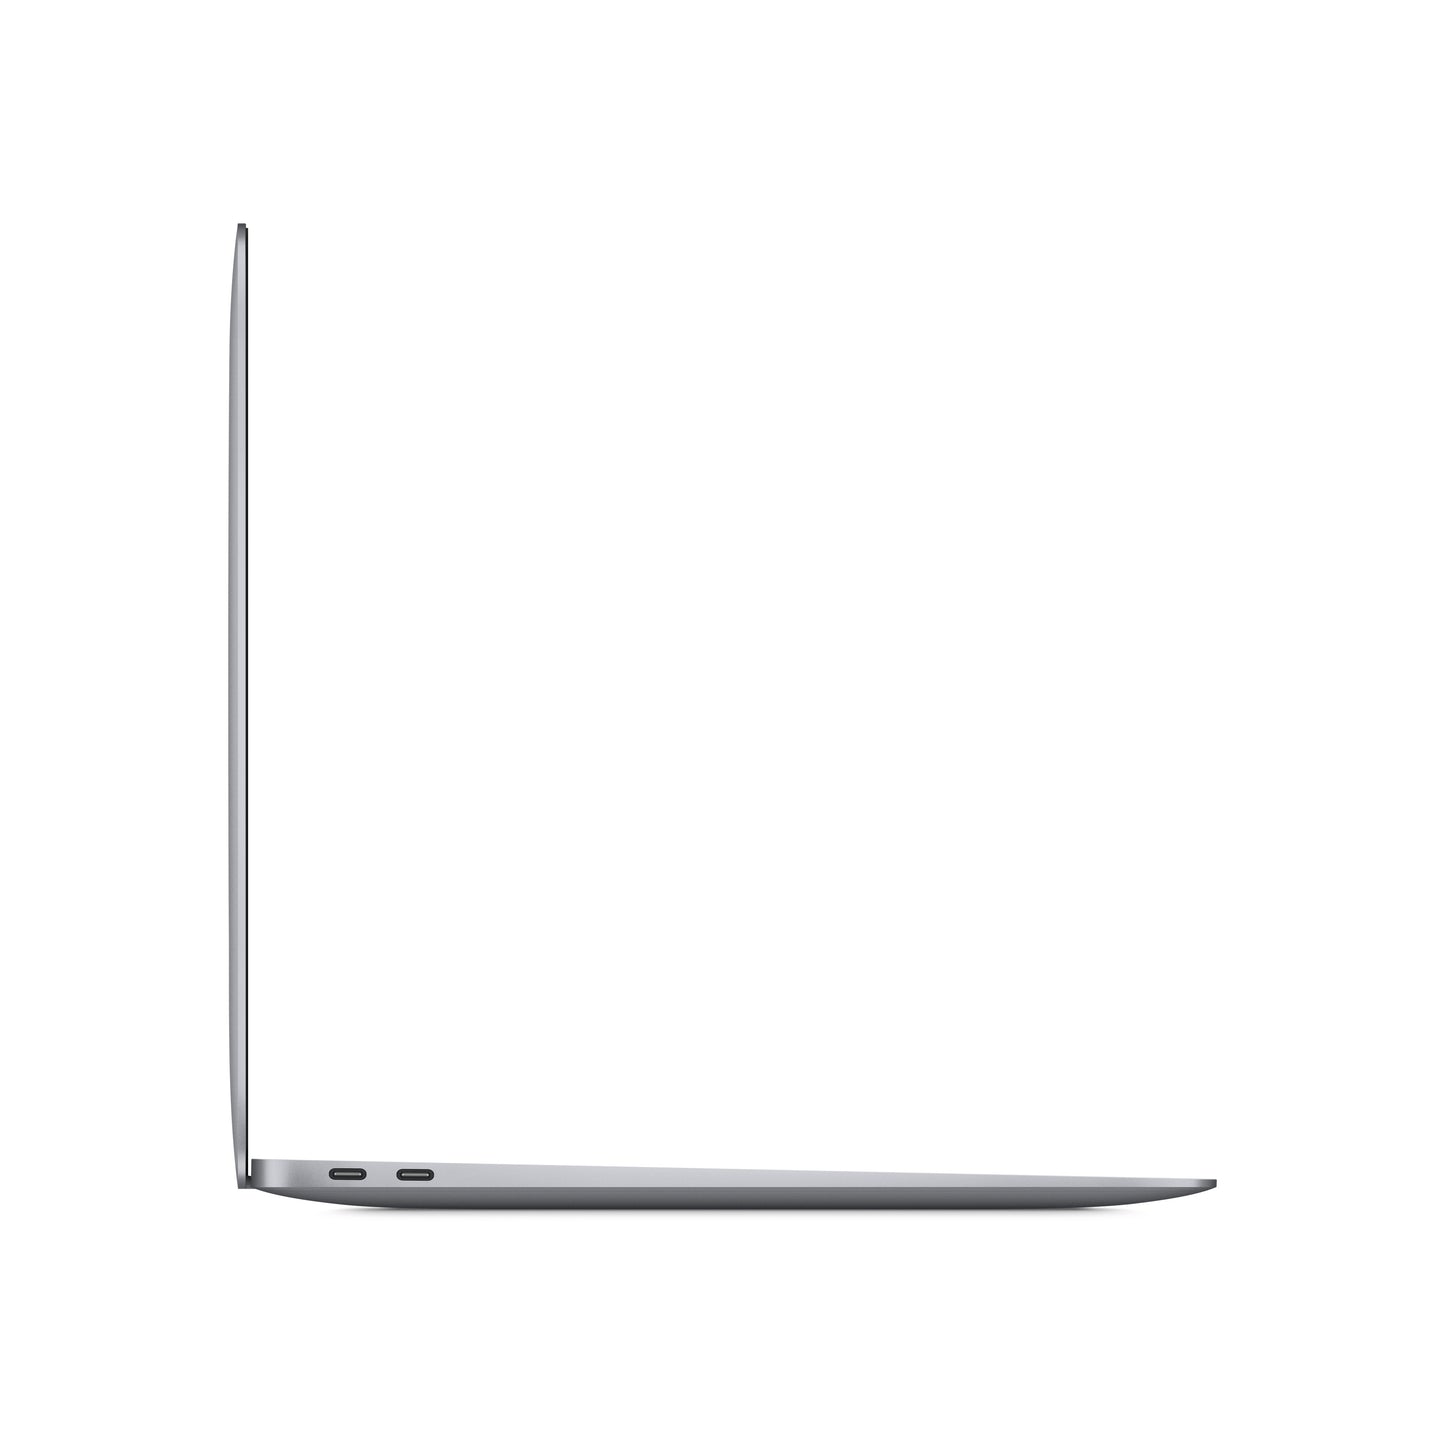 13-inch MacBook Air: Apple M1 Chip with 8-Core CPU and 7-Core GPU, 256GB SSD - Space Grey - Arabic/English